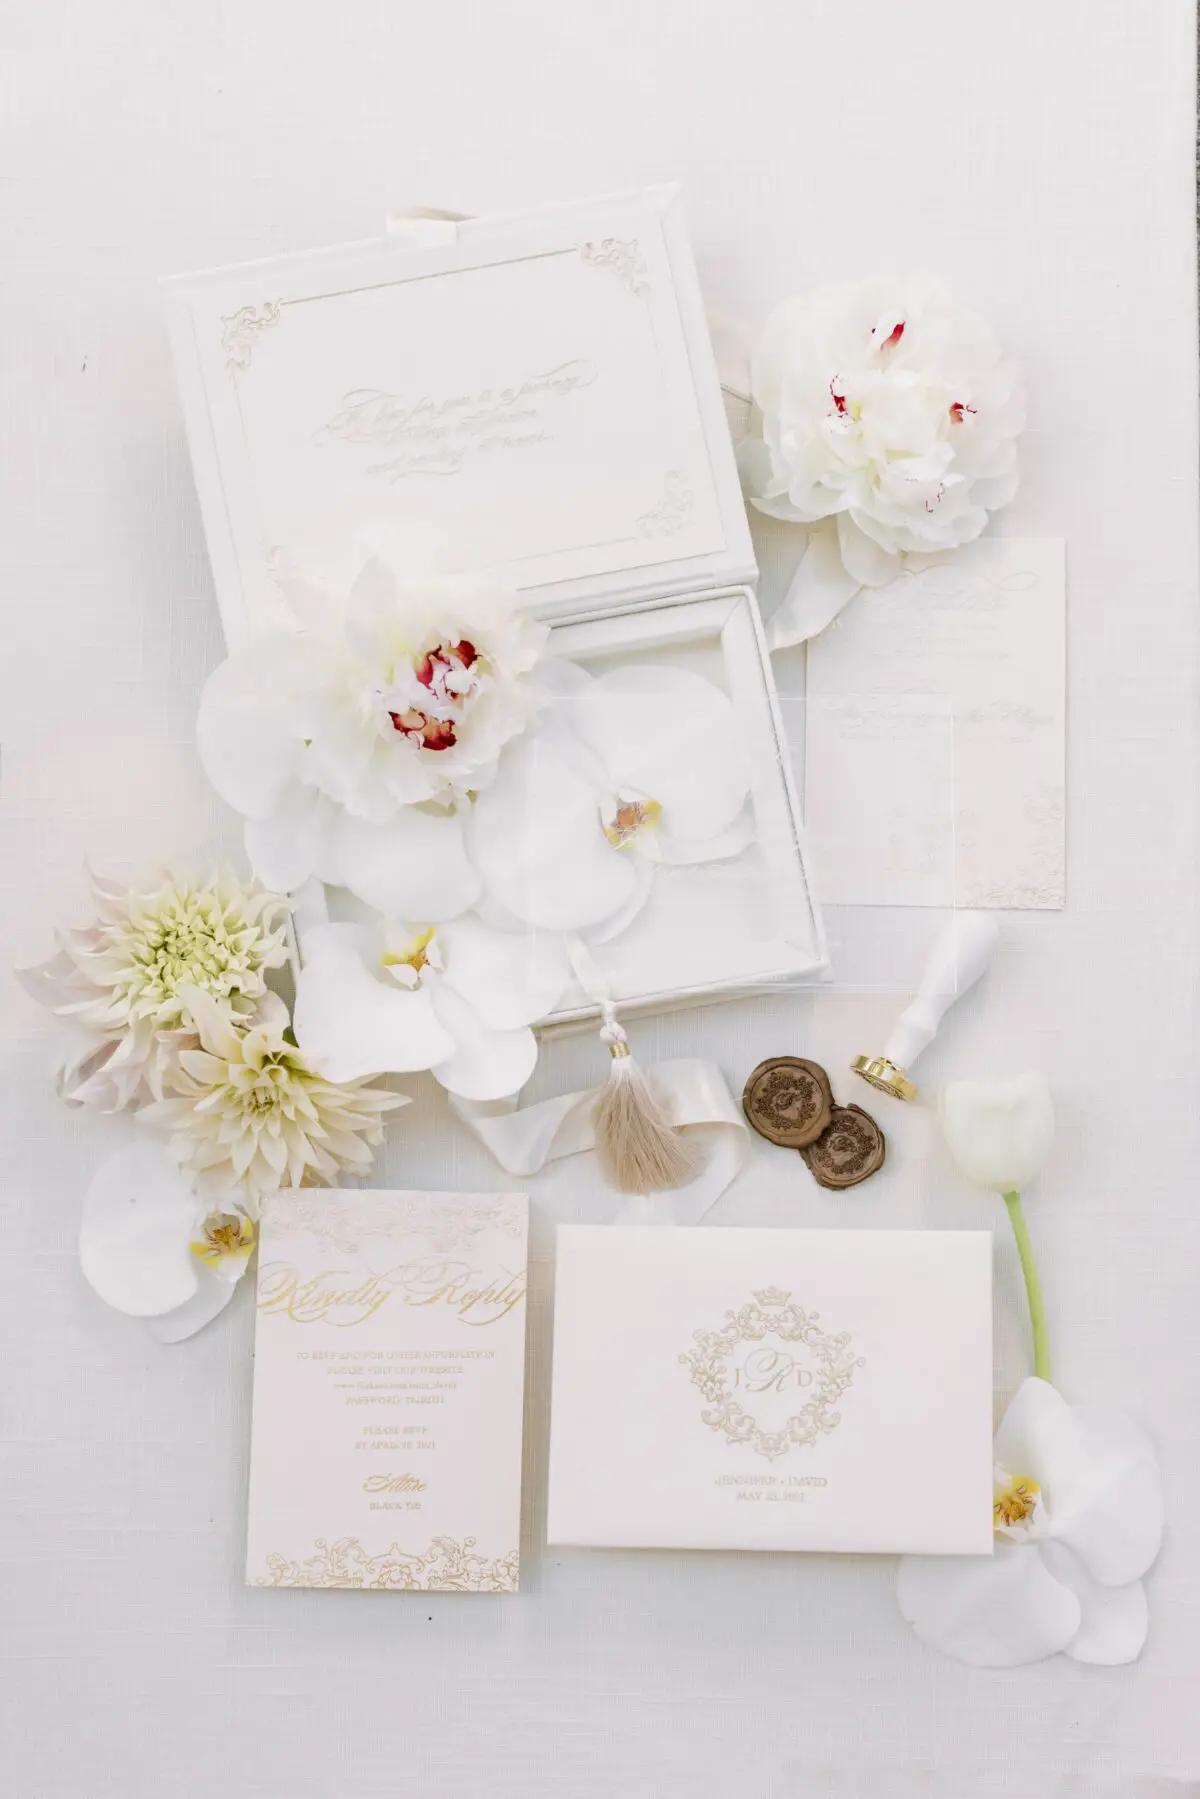 Luxury wedding invitation suite with acrylic stationery on a box - Photography: Brooke Images